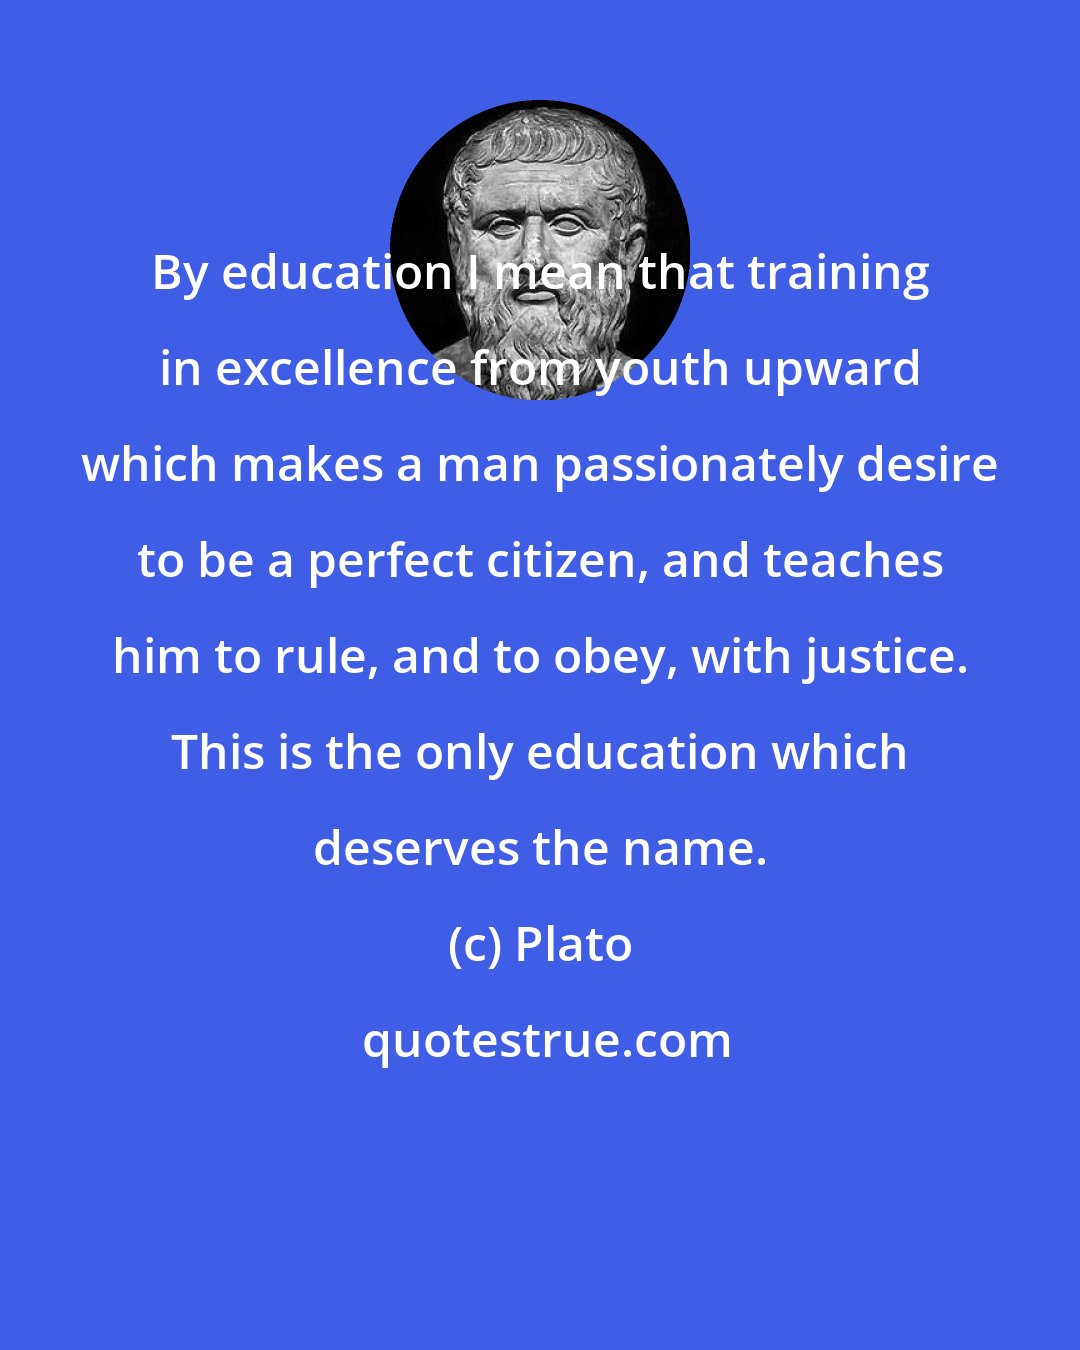 Plato: By education I mean that training in excellence from youth upward which makes a man passionately desire to be a perfect citizen, and teaches him to rule, and to obey, with justice. This is the only education which deserves the name.